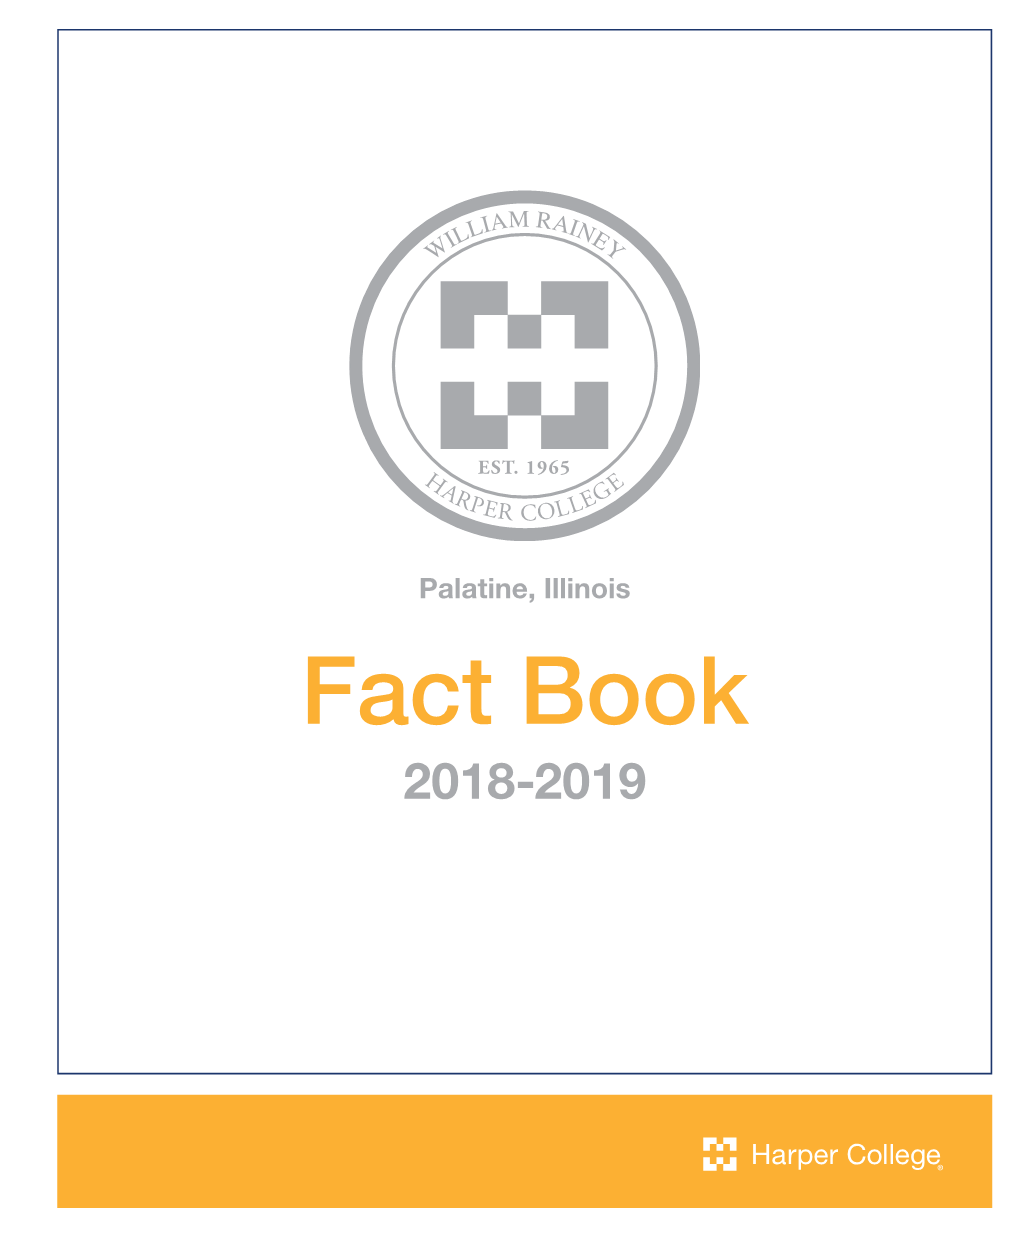 Fact Book 2018-2019 MISSION